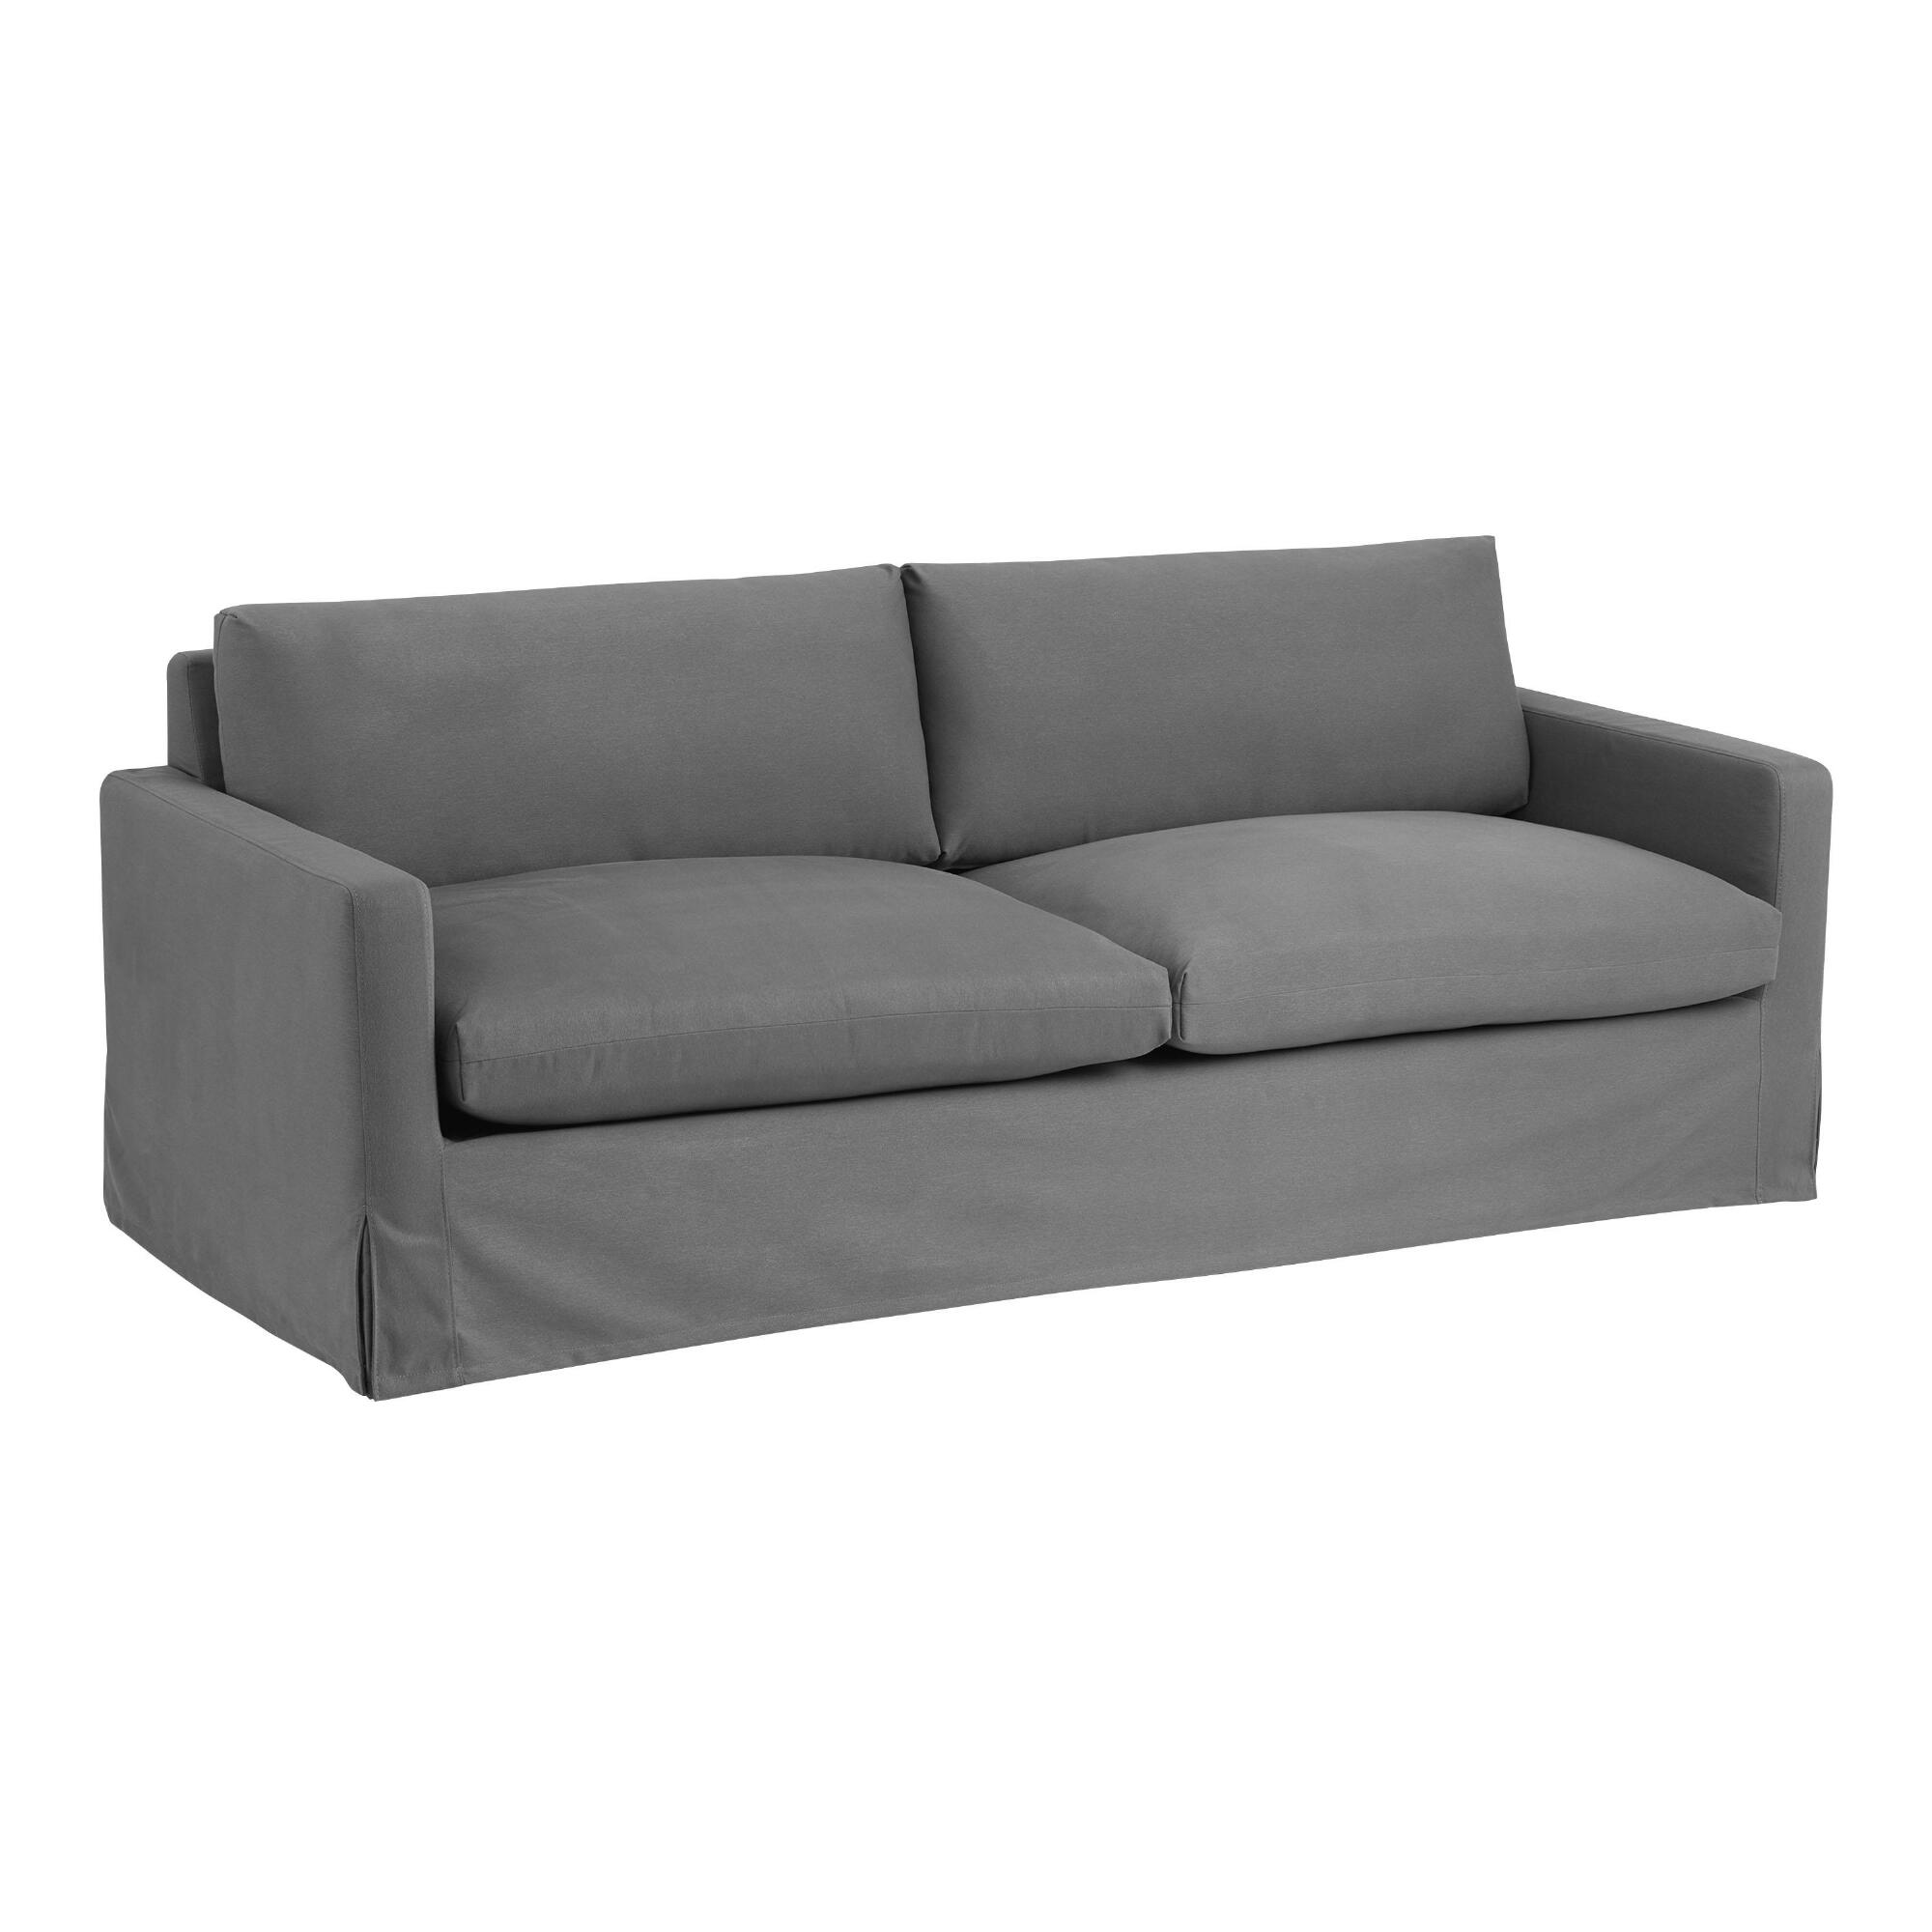 Chandler Sofa Replacement Slipcovers 5 Piece Set: Gray - Polyester by World Market